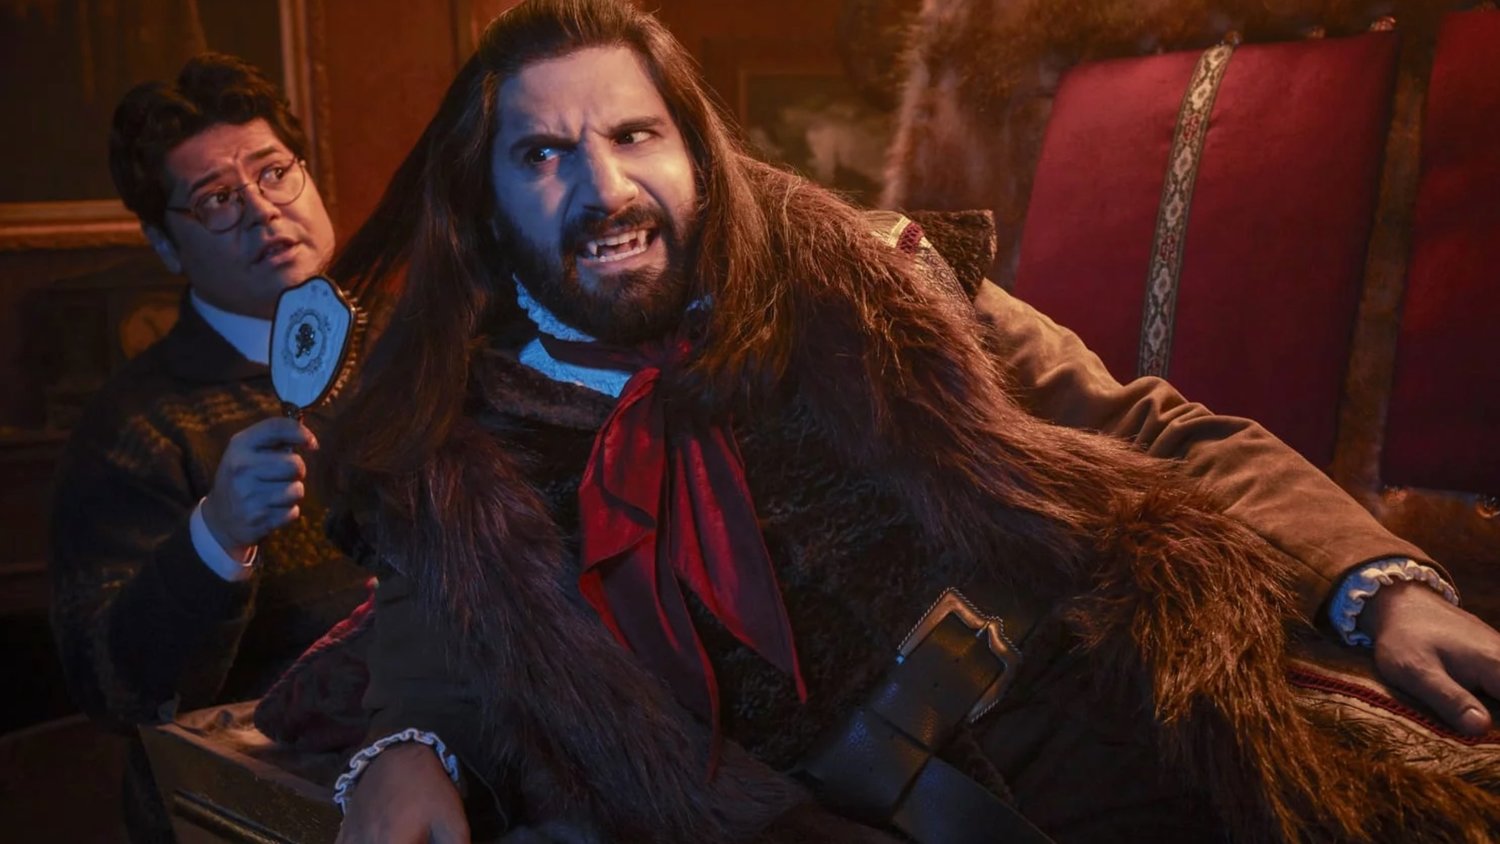 What We Do In The Shadows Whatwedointheshadows Jemaineclement